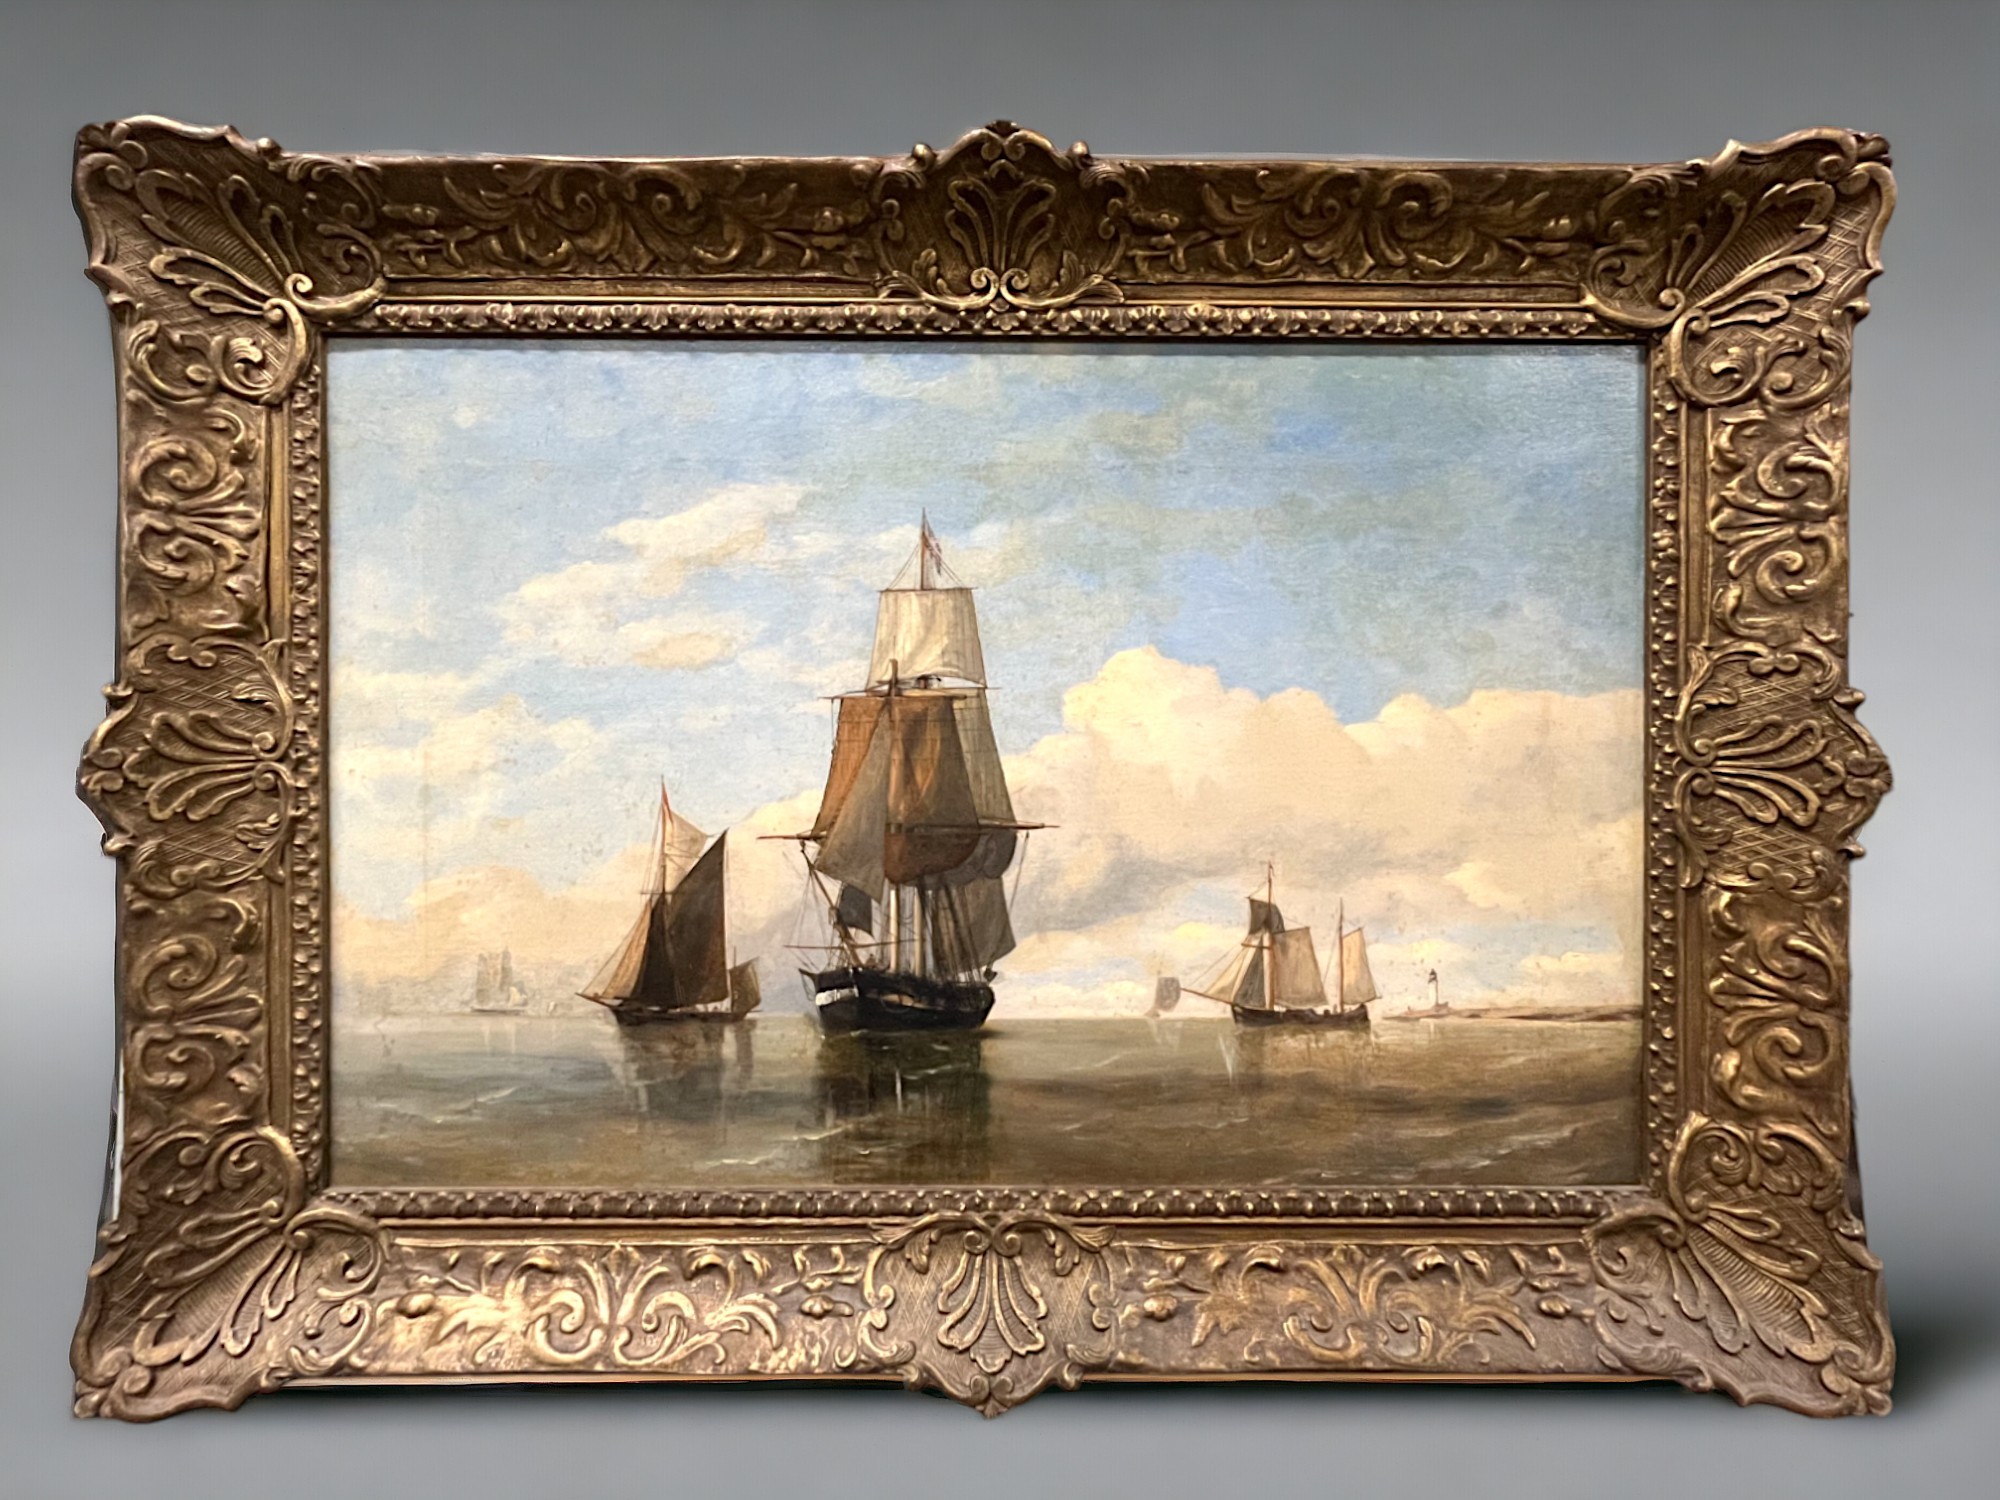 An Early 20th Century Oil on Canvas. Possibly Edward King Redmore. Nice decorative Ships at Sea